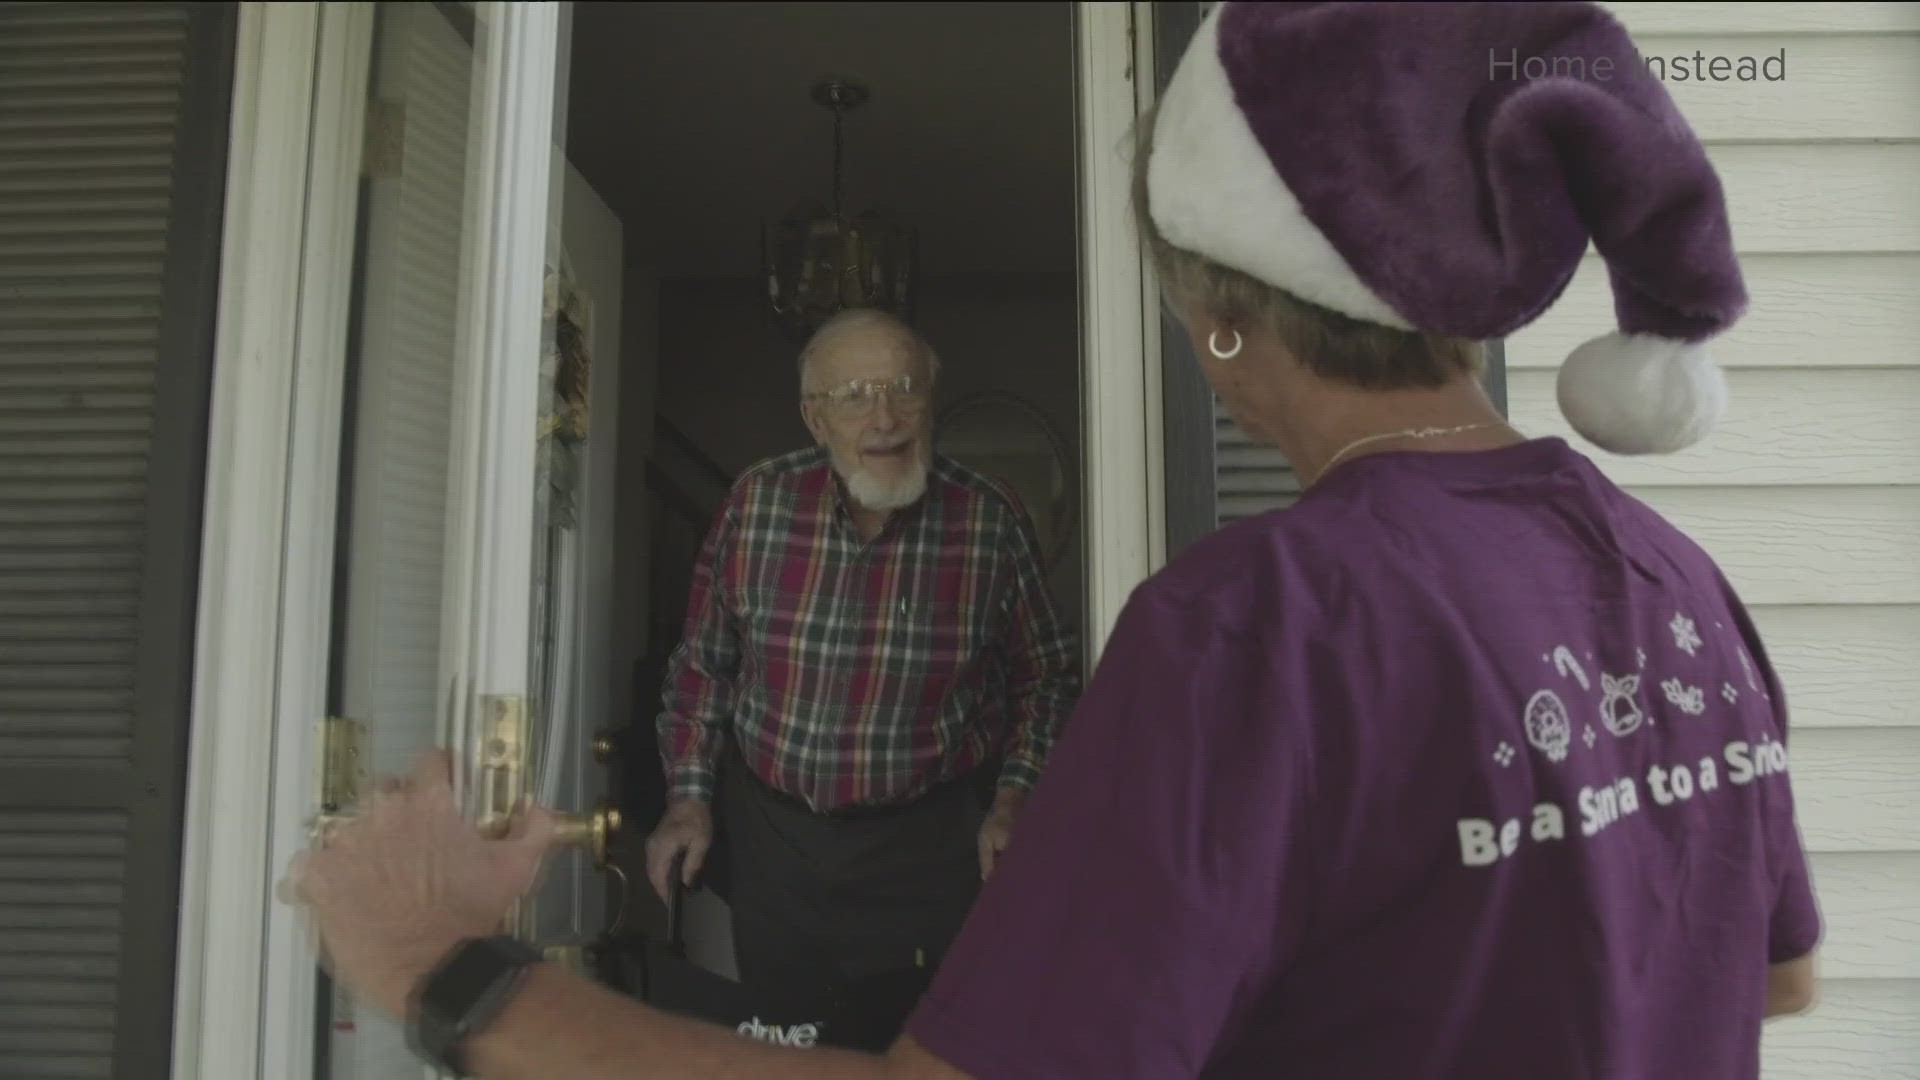 Home Instead is hosting a nationwide campaign to provide gifts to the elderly this holiday season.